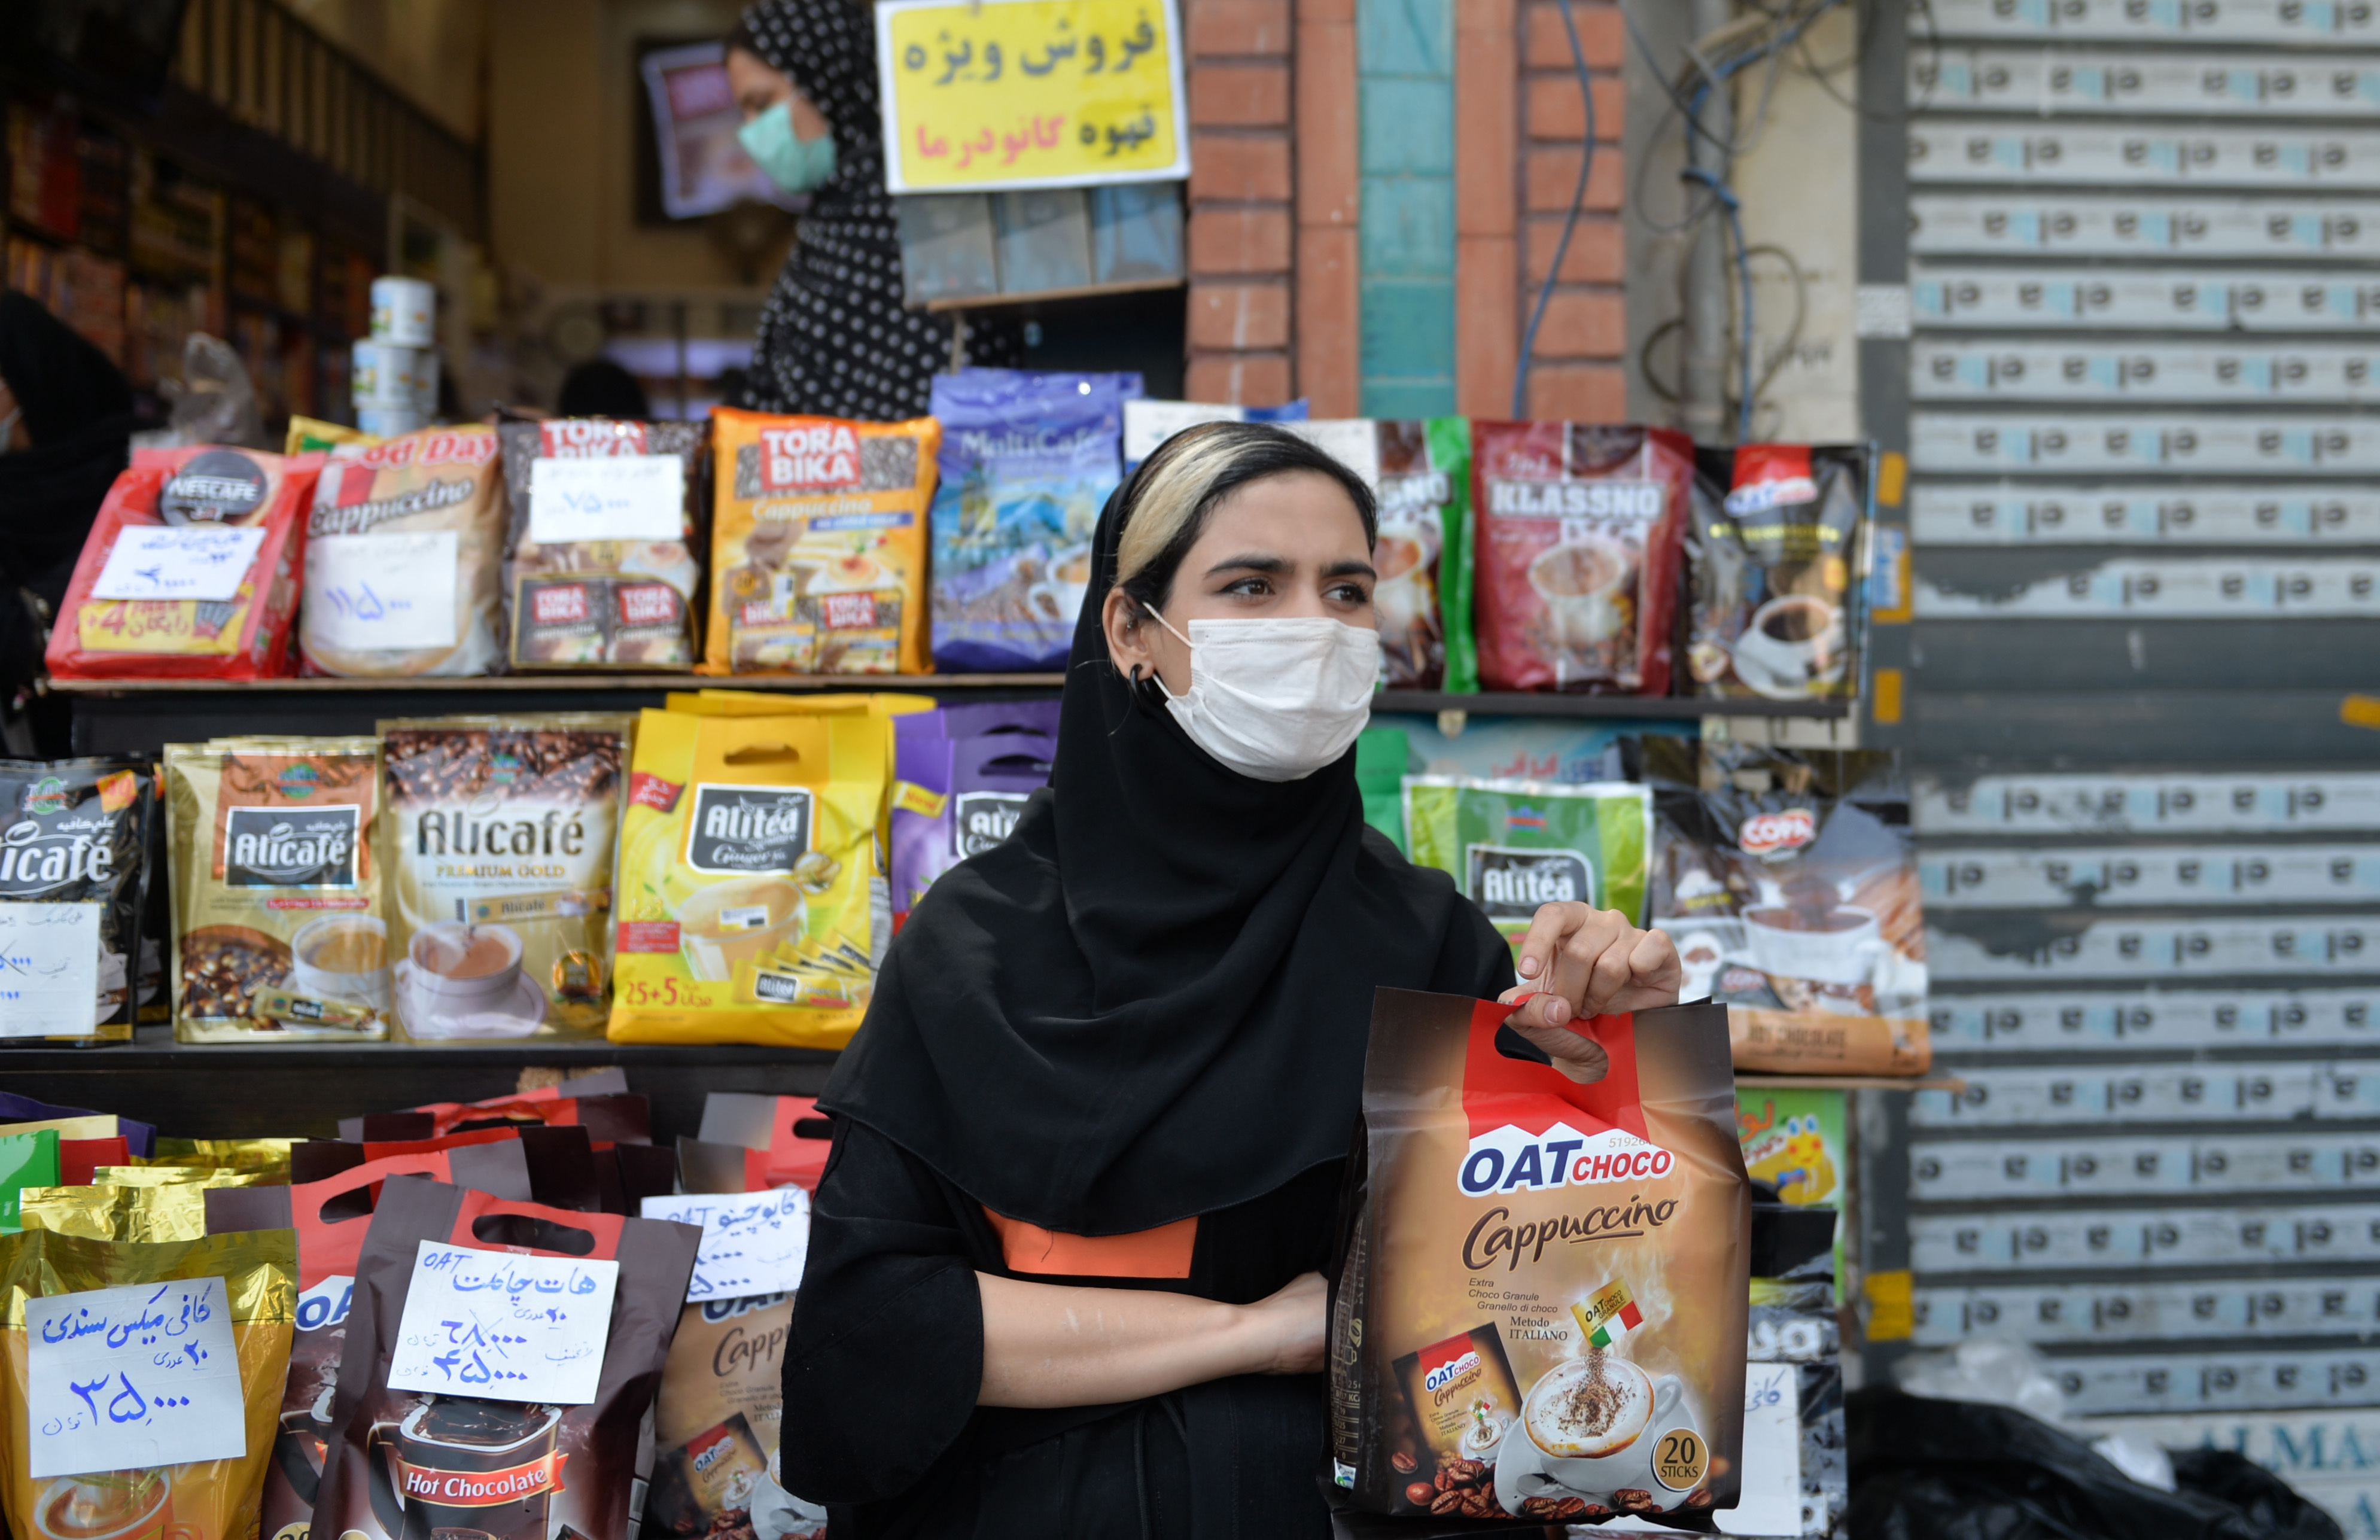 More women than men work in outdoor markets like this one in Tehran. Restrictions on public gatherings have forced many such shops and stands out of business. (Photo by Fatemeh Bahrami/Anadolu Agency via Getty Images)